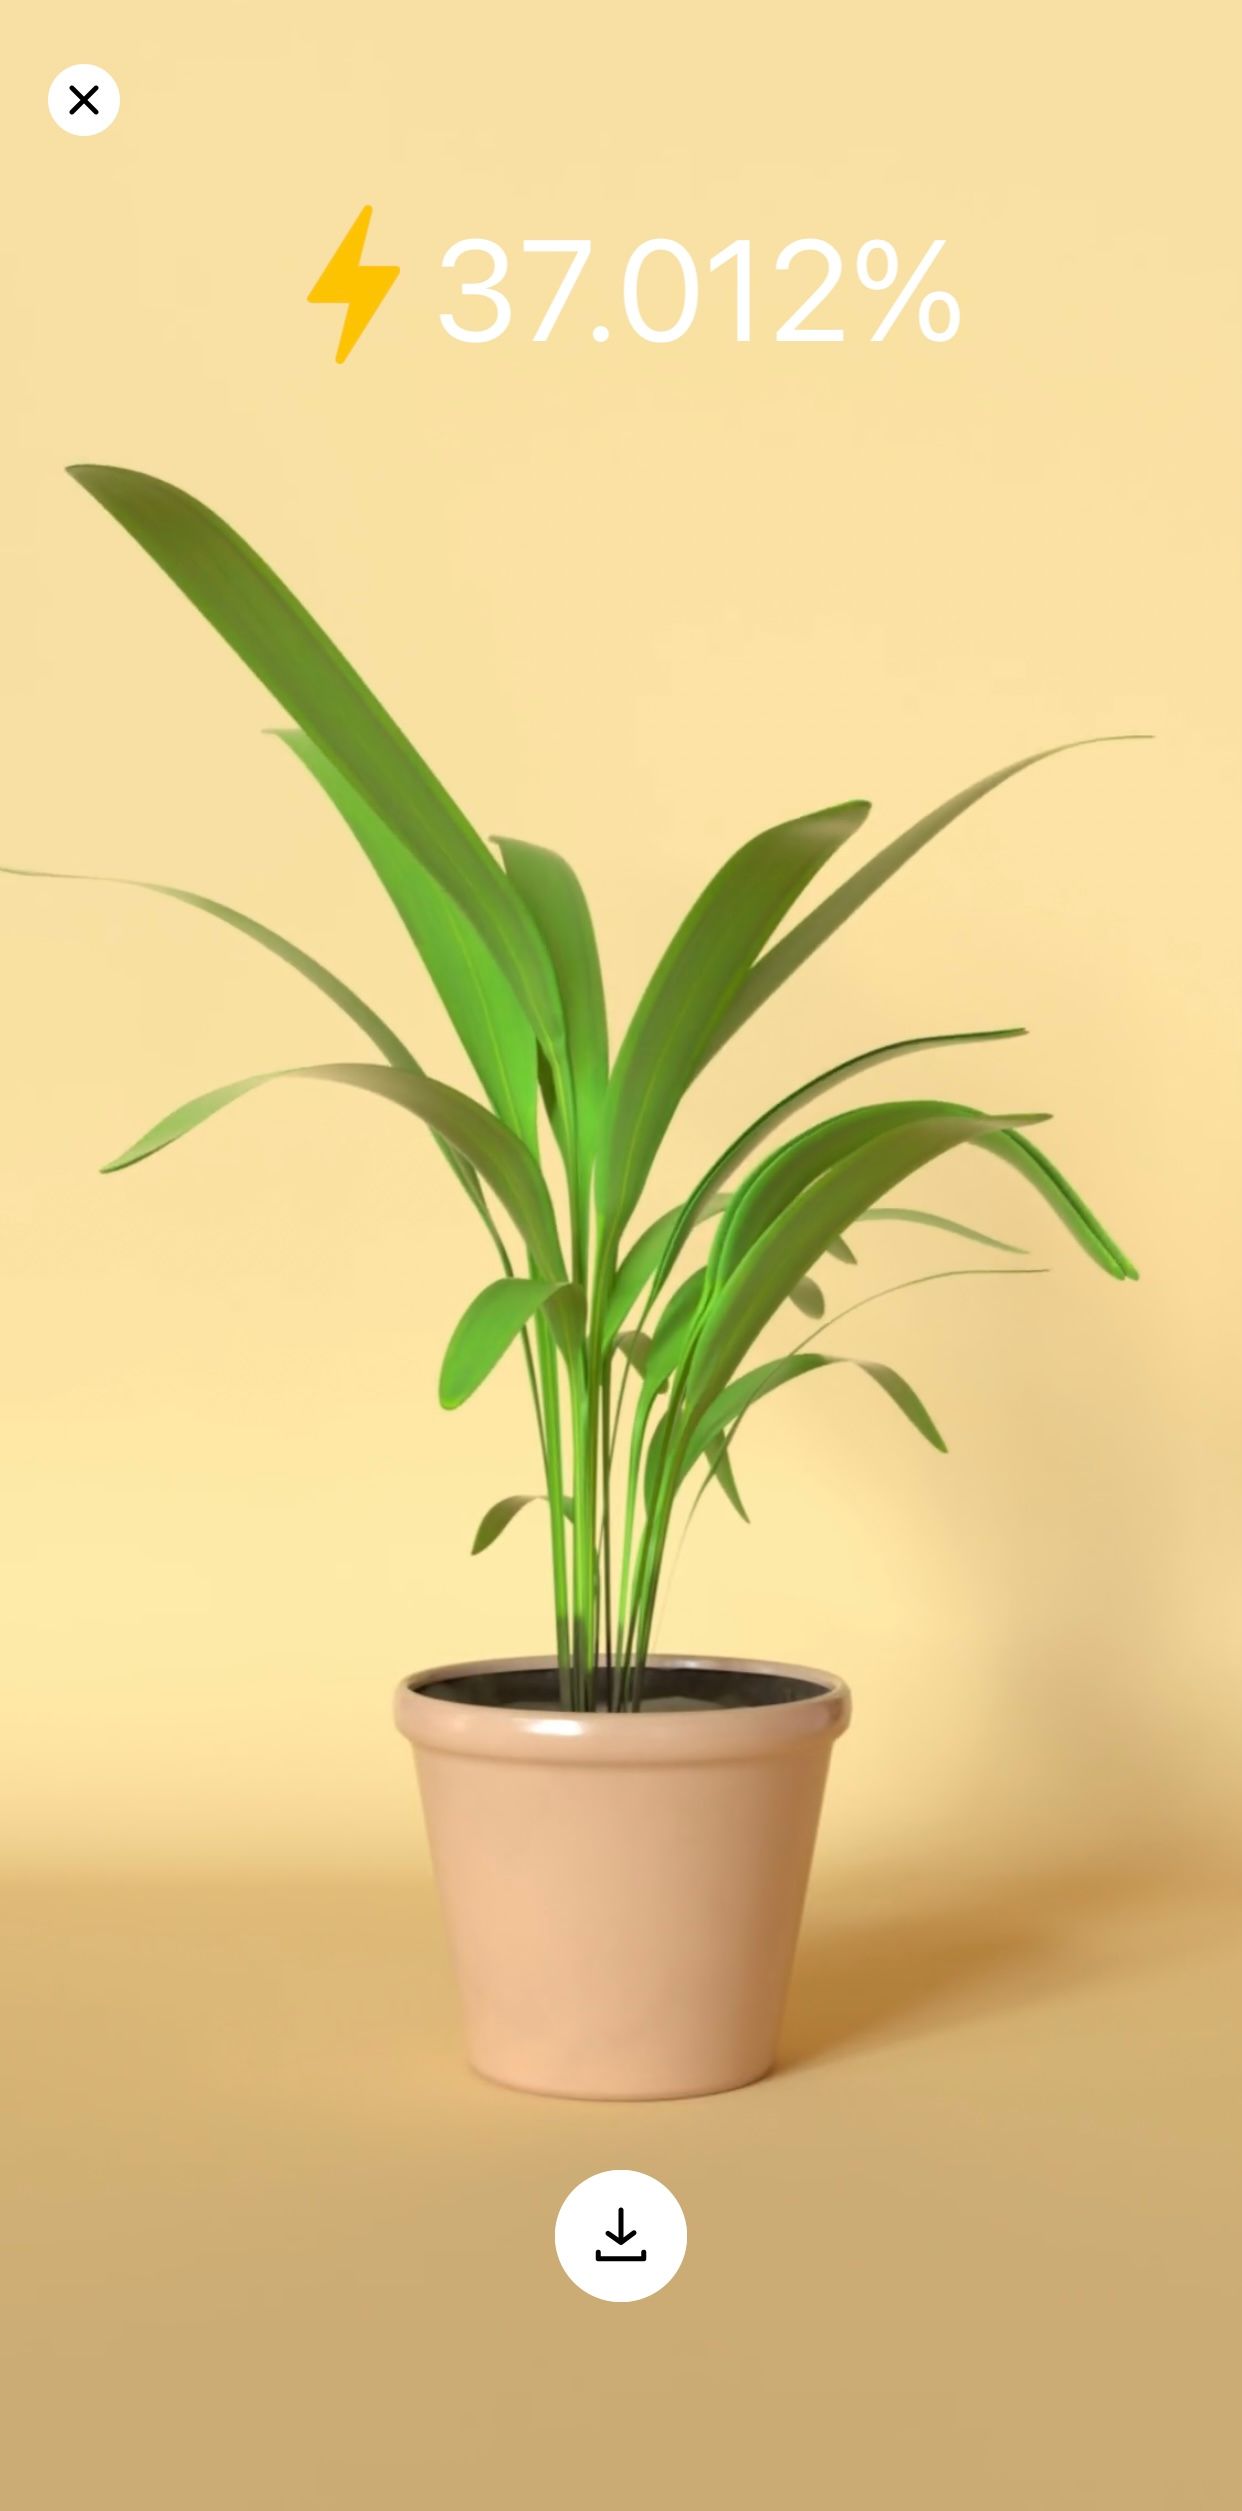 iPhone charging animation of erect green potted plant against yellow-beige wall